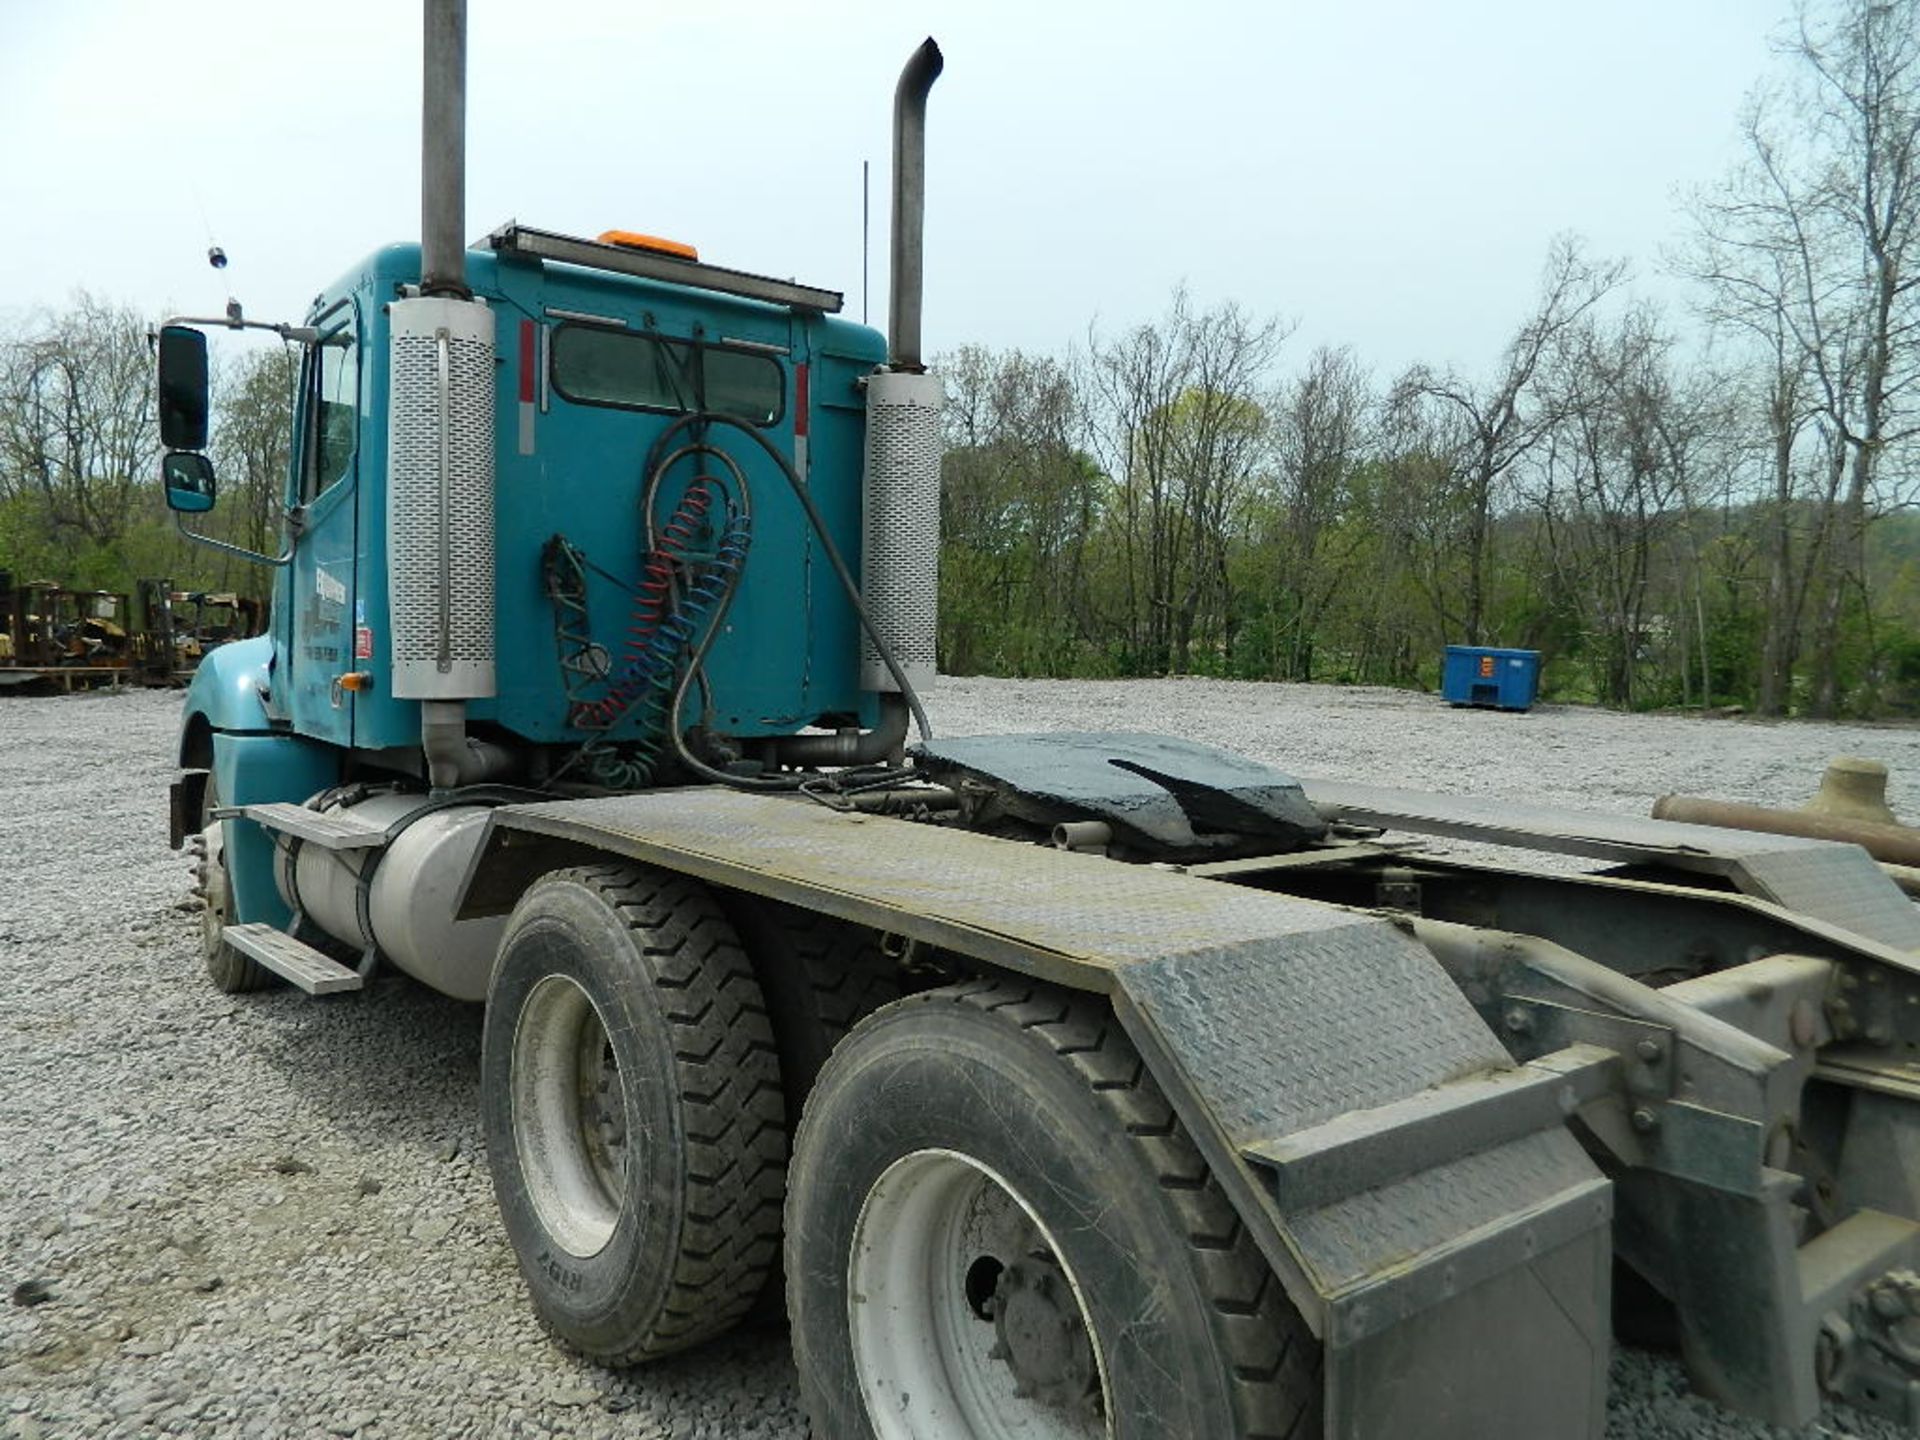 2004 FREIGHTLINER T/A DAY CAB TRUCK, CAT C15/435 DIESEL, 13-SPEED, WETLINE KIT, WITH 100-GALLON - Image 2 of 3